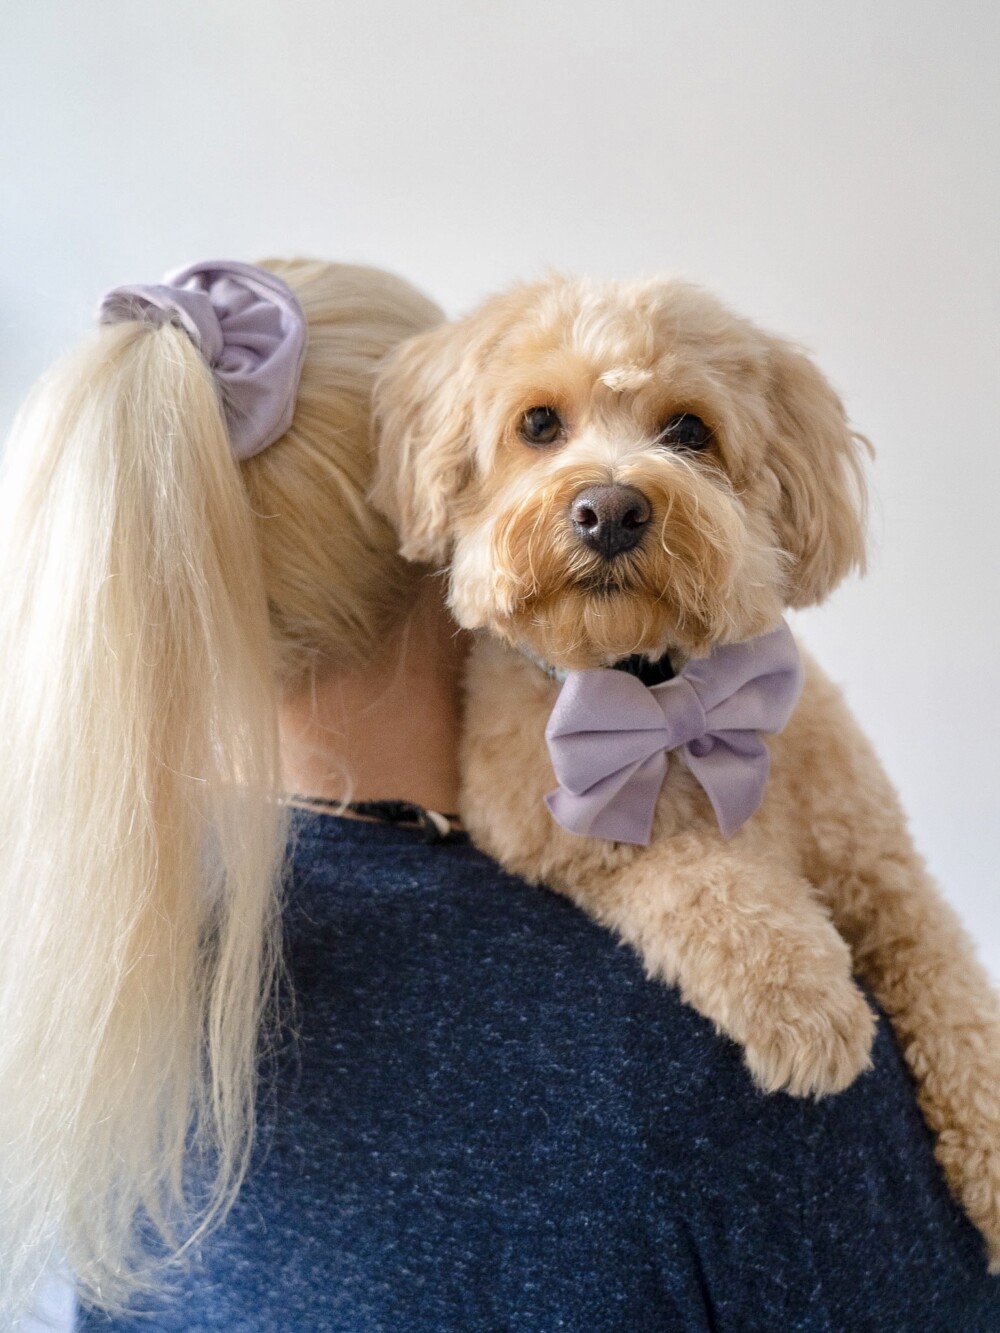 a blonde haired woman with her back to the camera and a cute lilac scrunchie in her hair. she is holding a blonde dog who is wearing a matching large sailor bow.